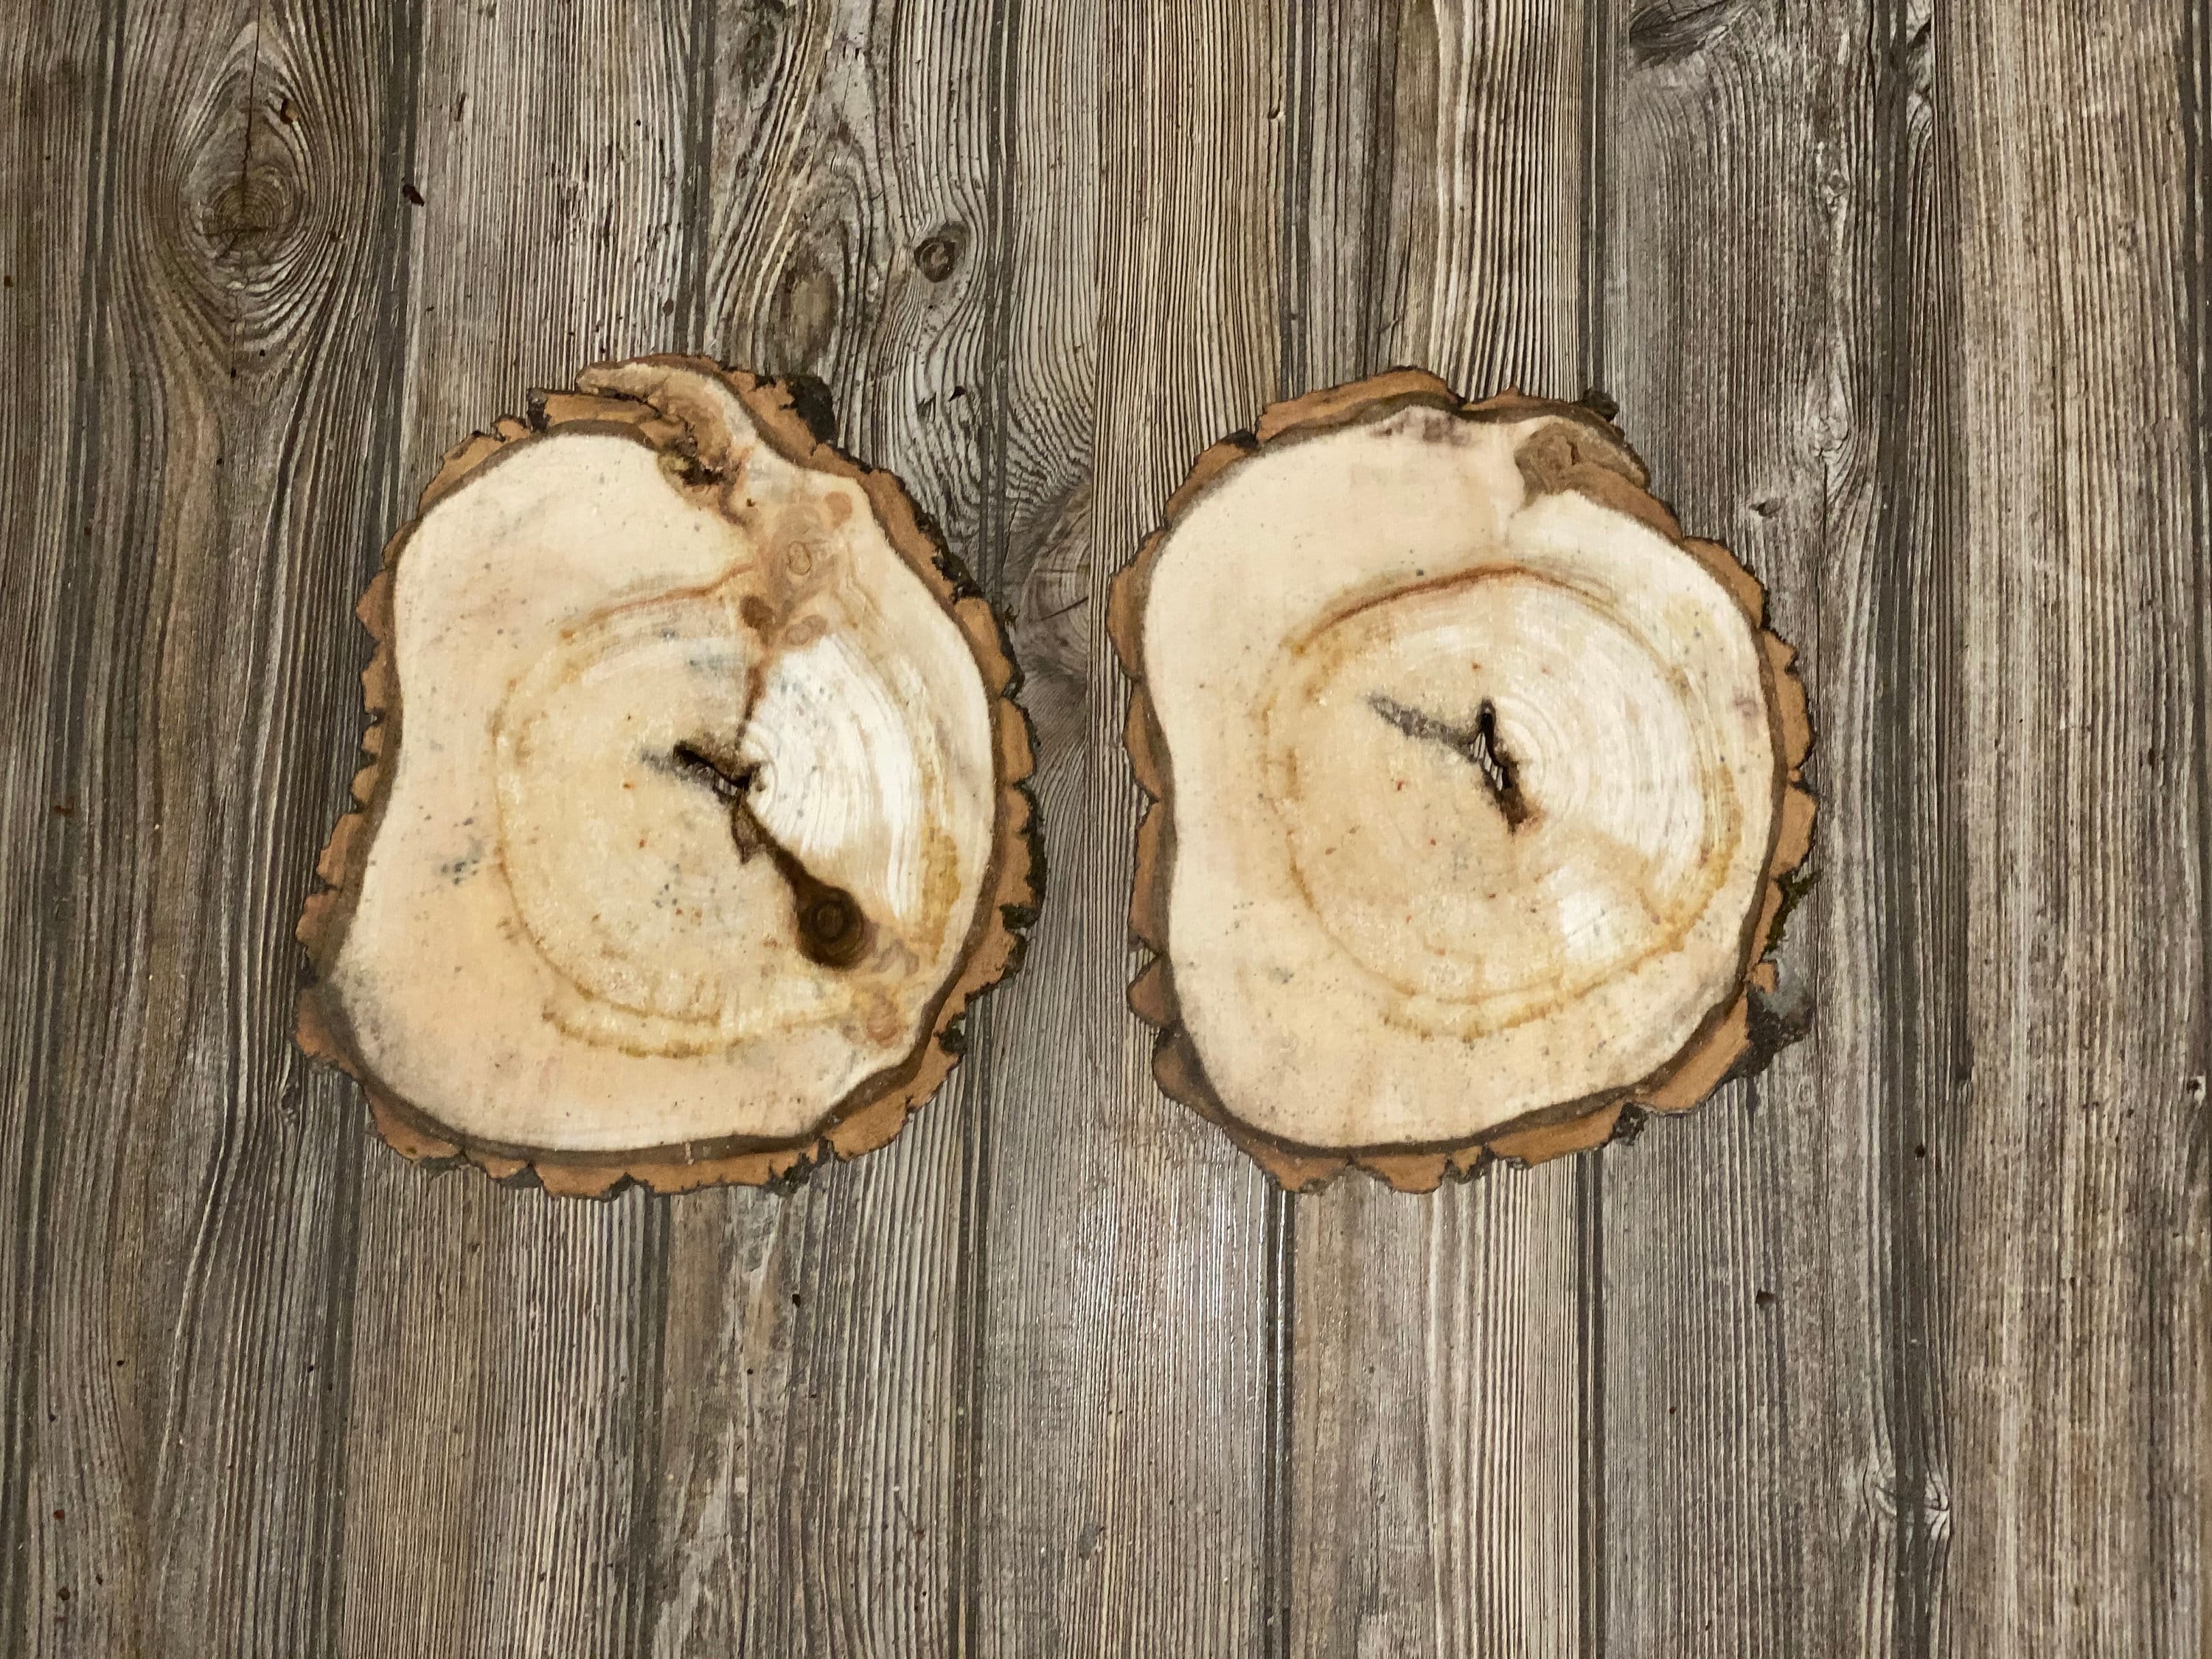 Two Aspen Burl Slices, Approximately 10.5-11 Inches Long by 9 Inches Wide and 3/4 Inches Thick